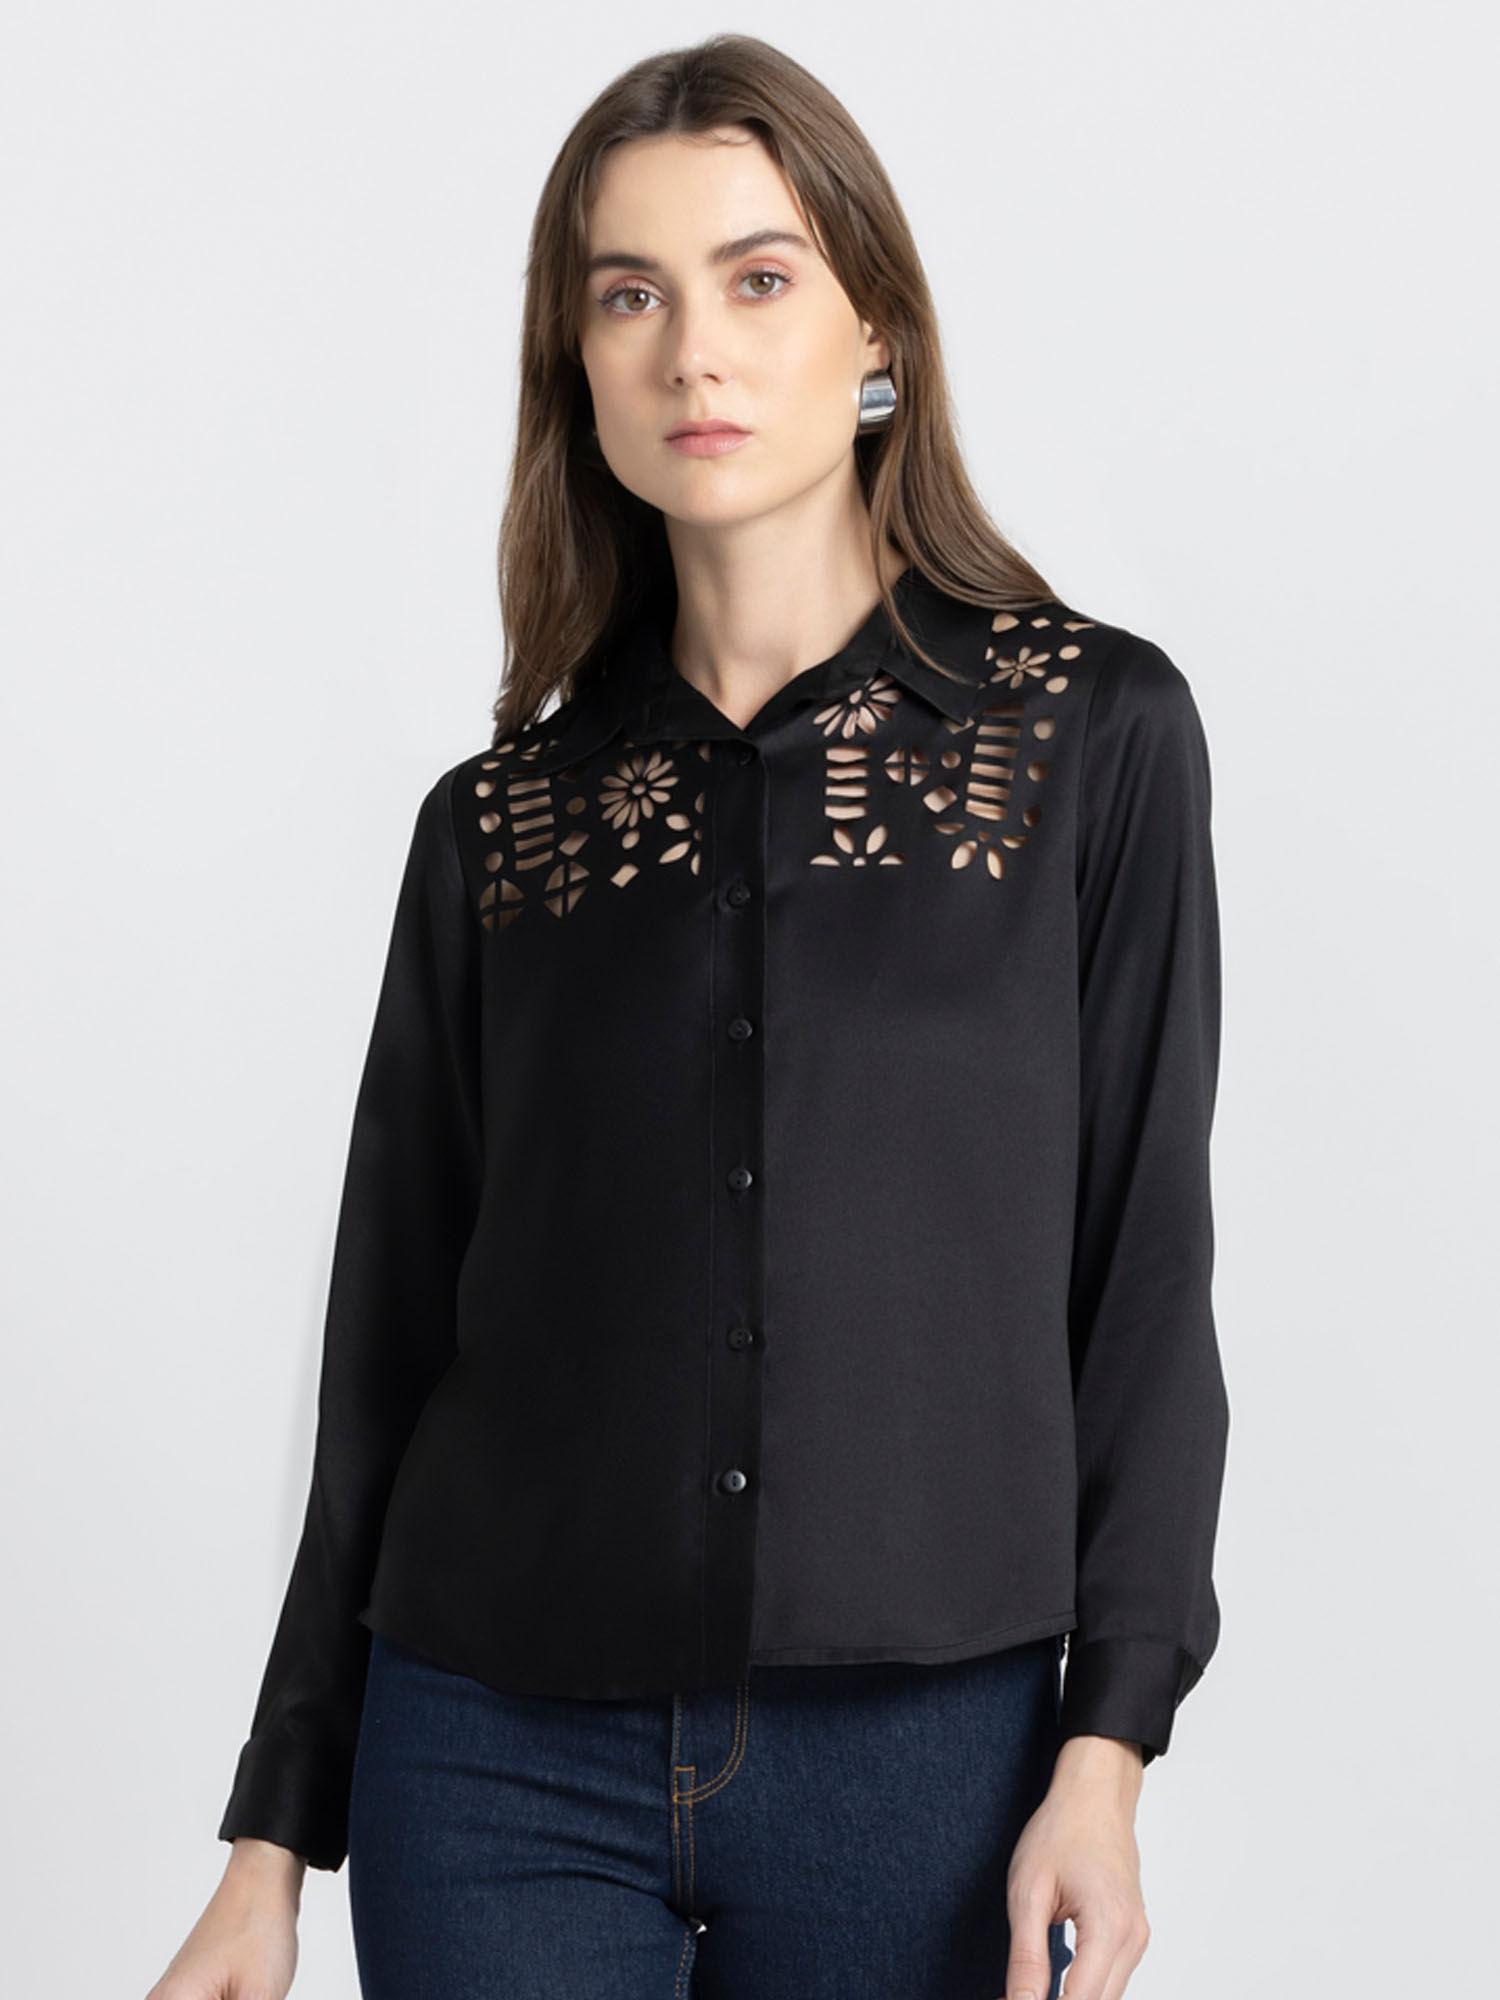 black self design long sleeves party shirts for women